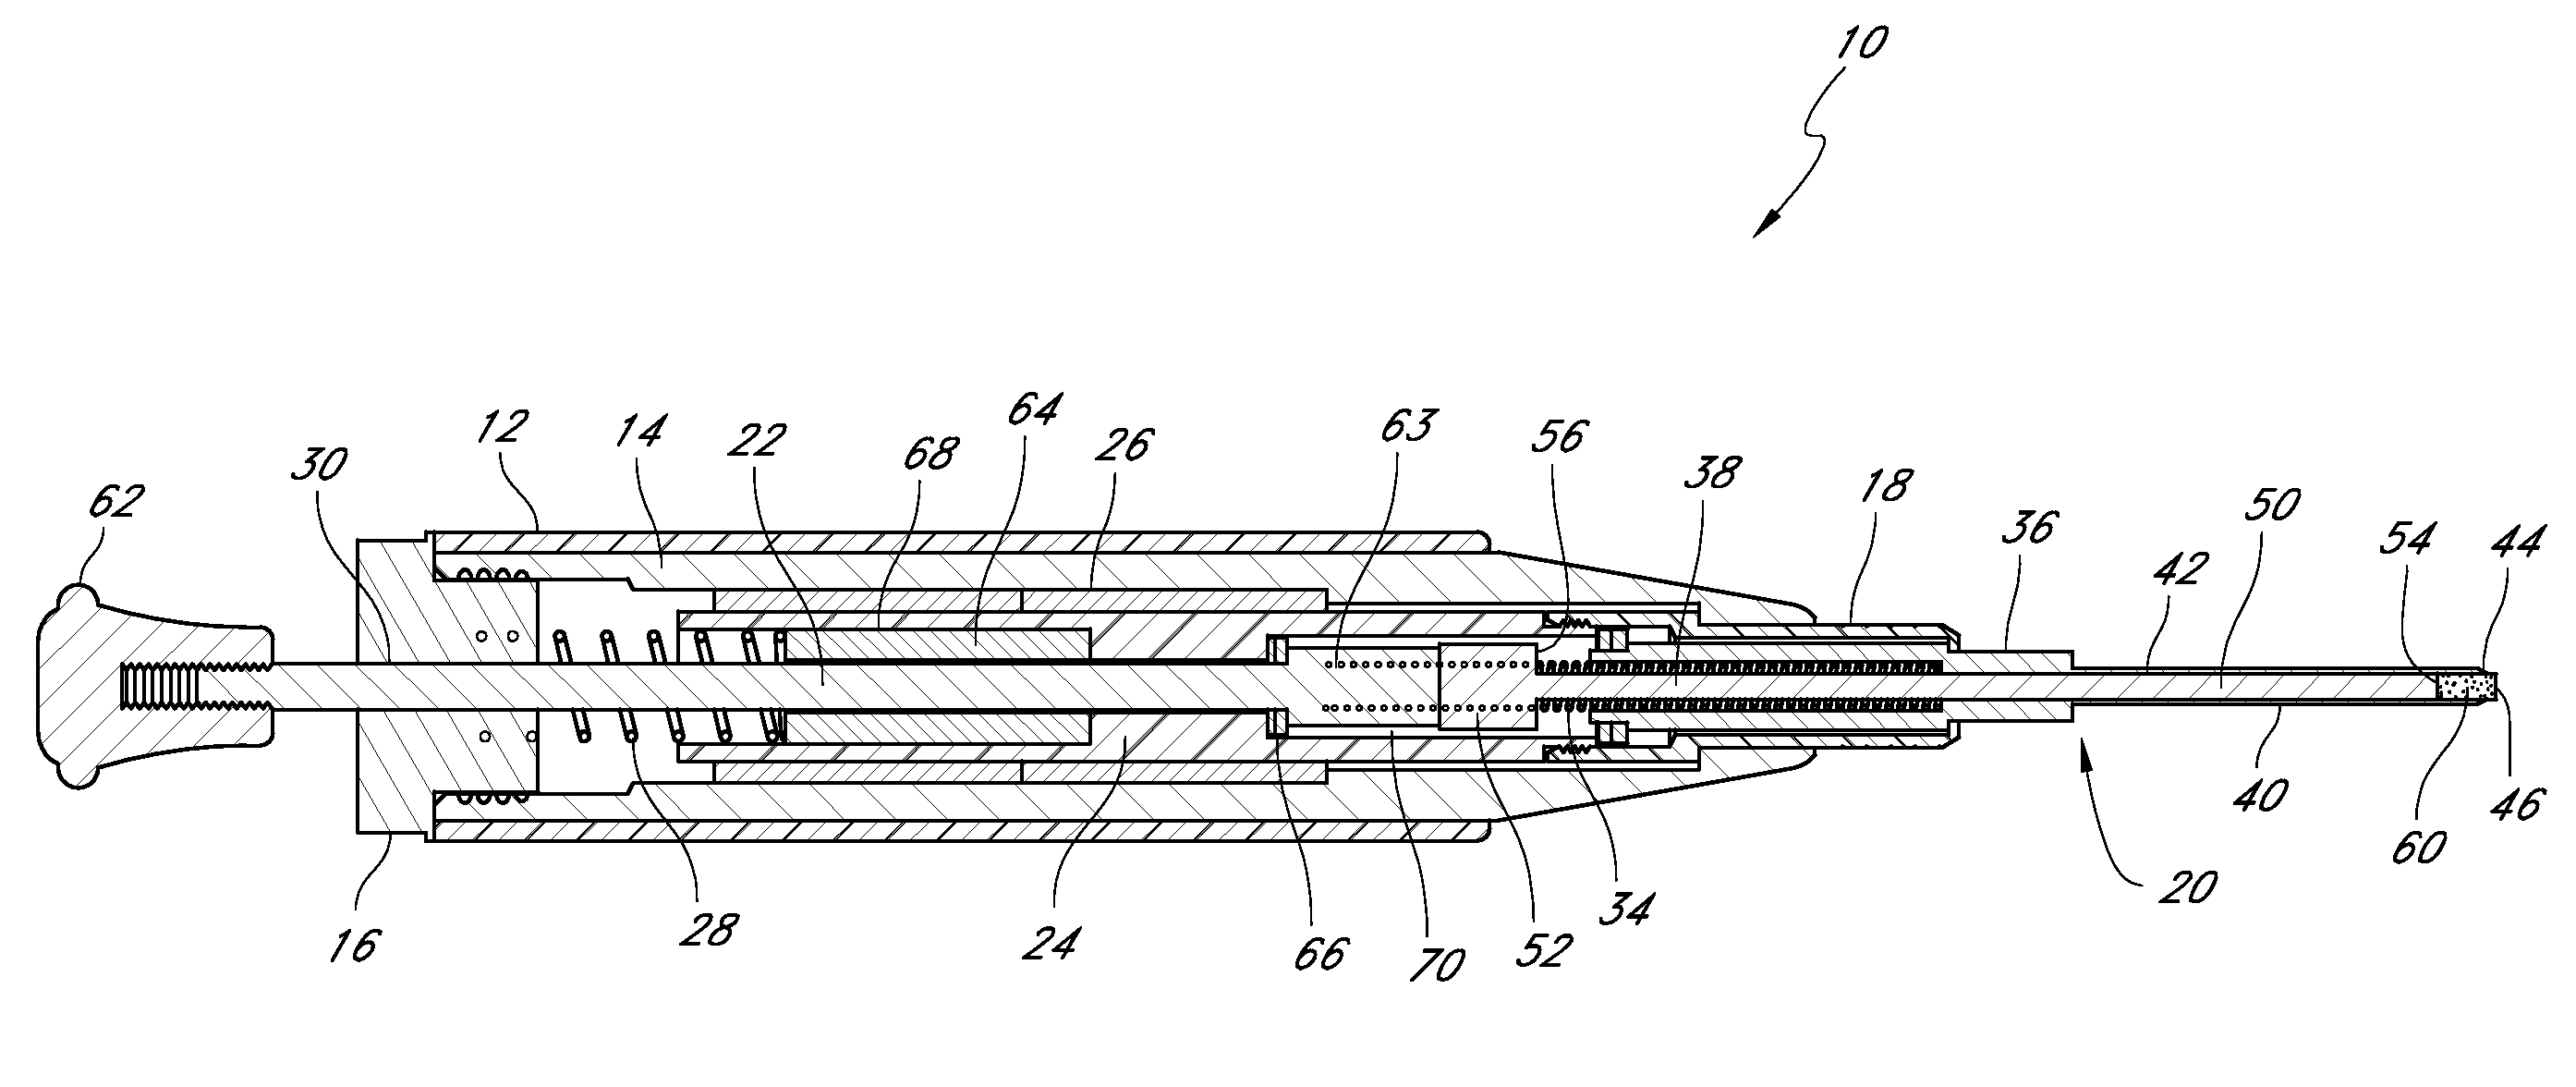 Handheld powder handling devices and related methods